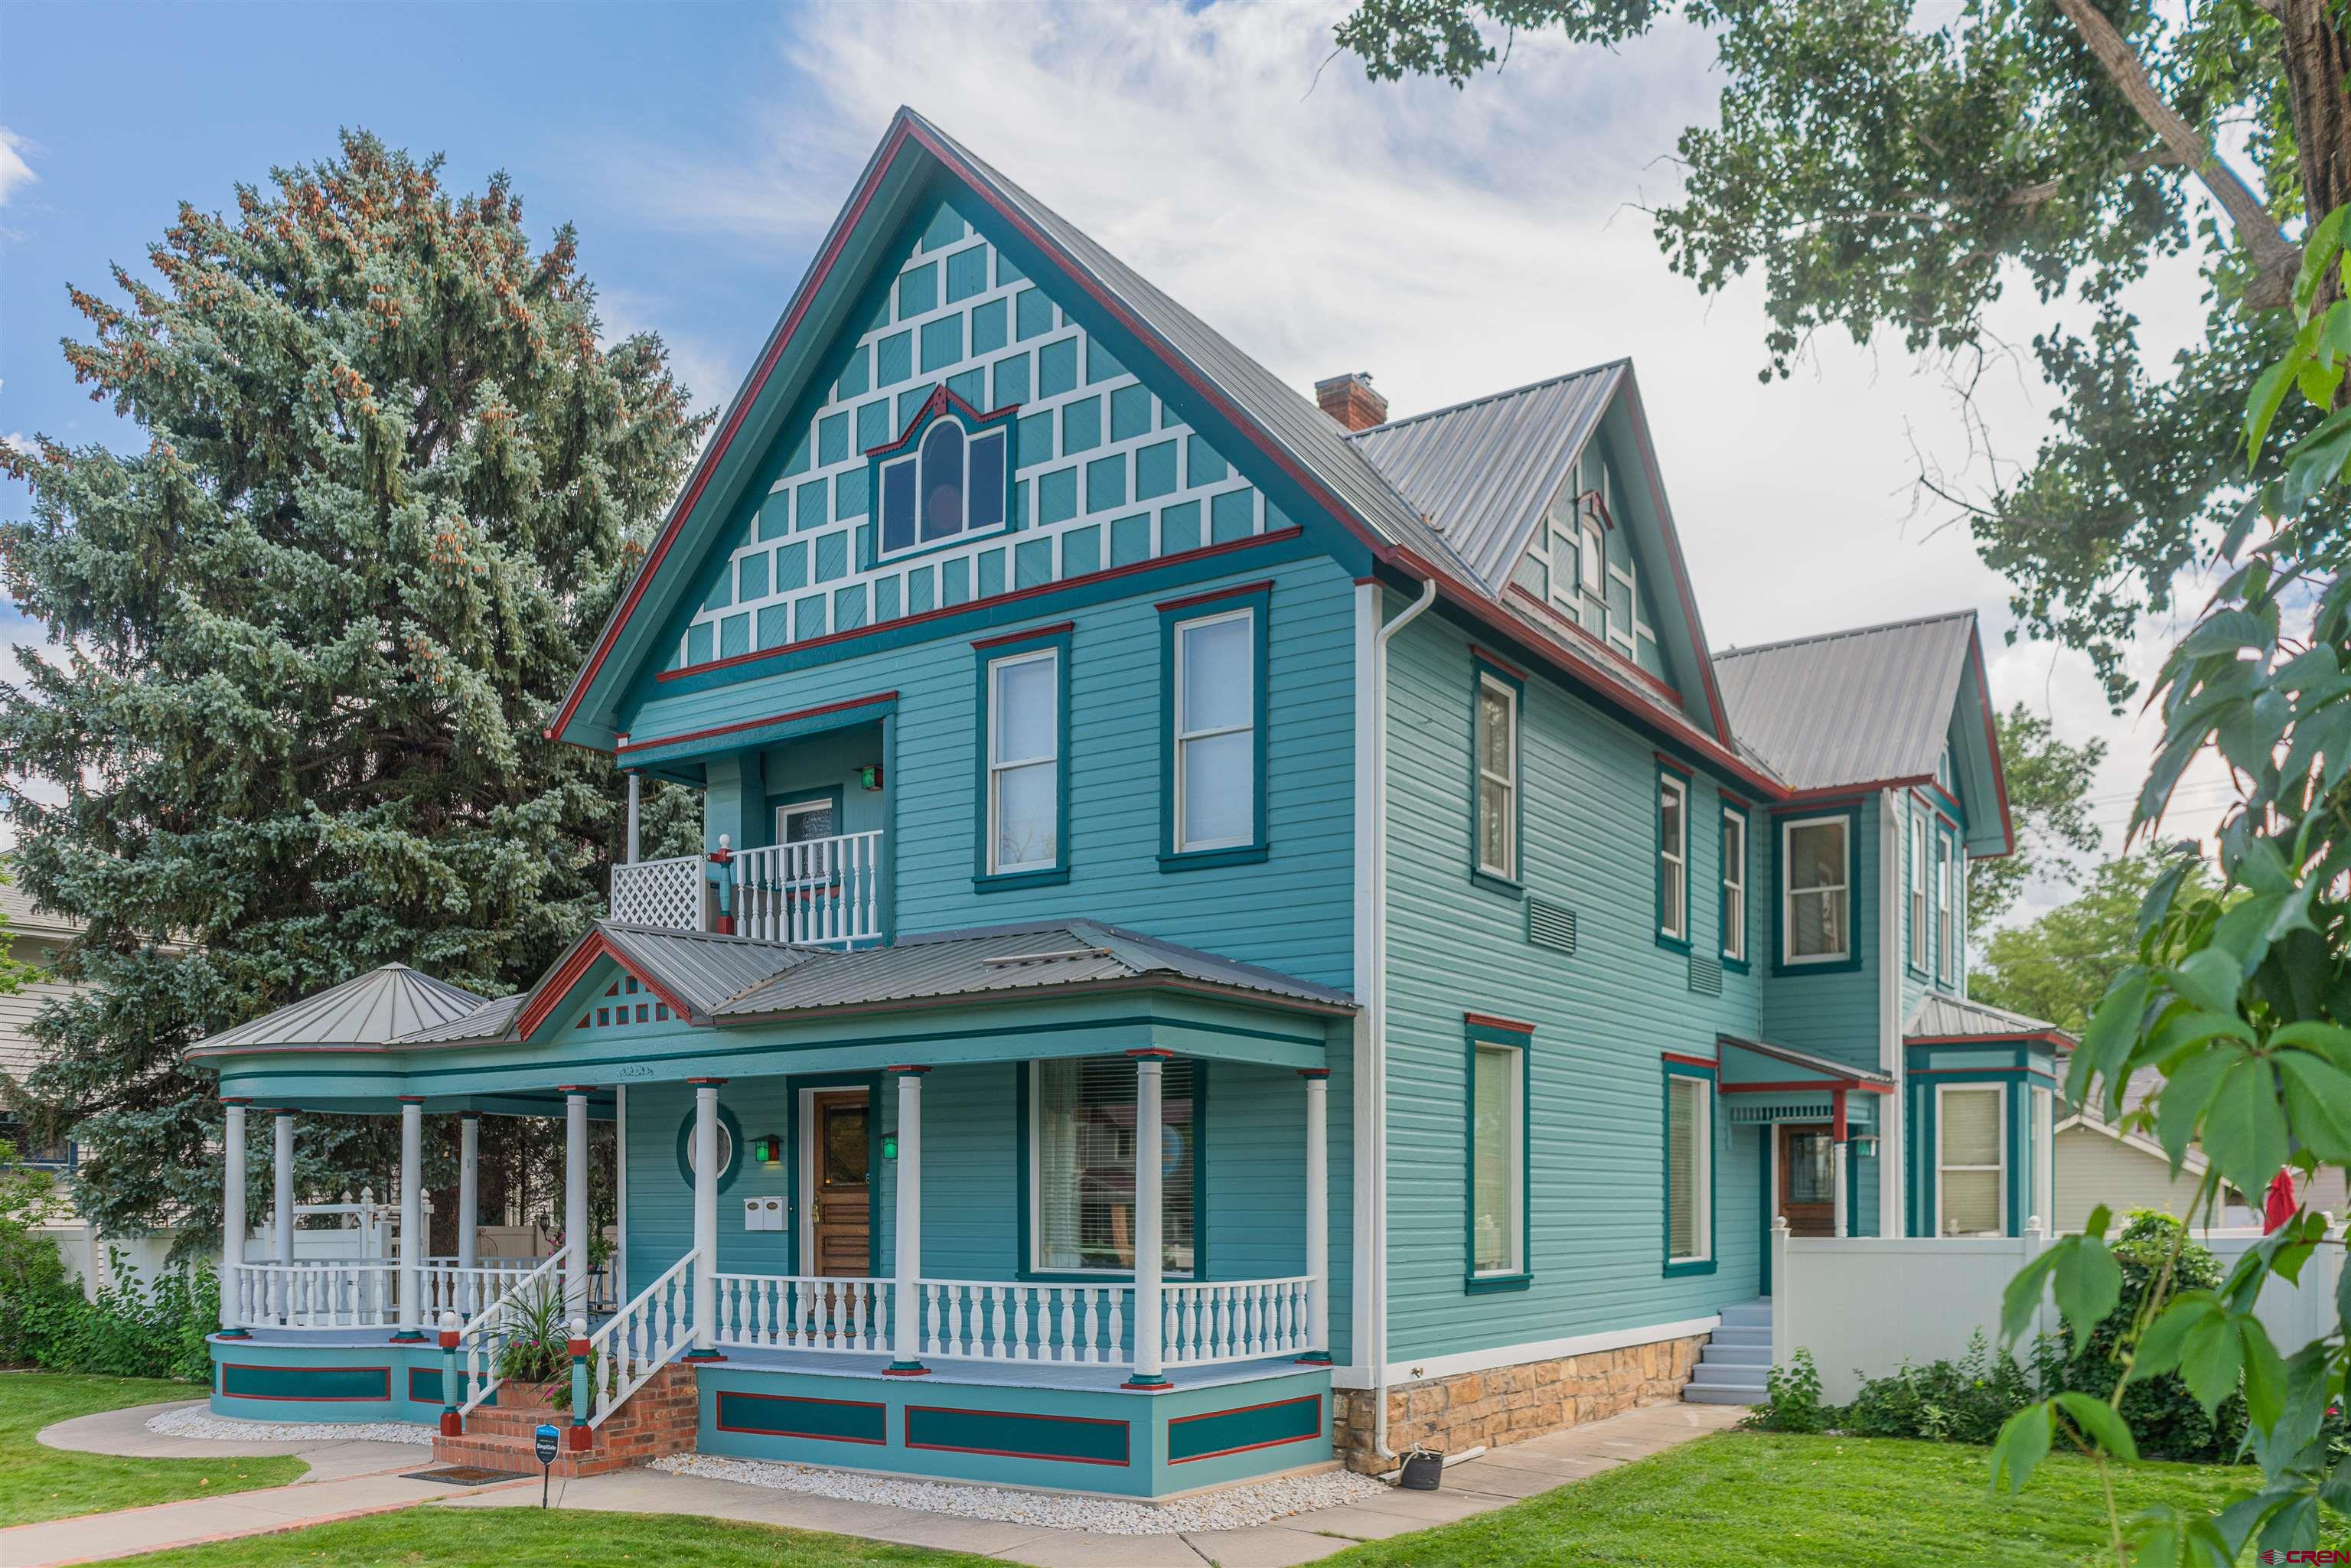 AN INCREDIBLE OPPORTUNITY AWAITS YOU TO OWN AN INVESTMENT PROPERTY WITH HISTORIC CHARM IN THE HEART OF DOWNTOWN MONTROSE,CO. Originally constructed in 1902 for J.V. and Emma Lathrop's family, This architecturally impressive home embodies a period of Montrose history. The Lathrop House was listed on the National Register of Historic Places in 1988 and is one of Montrose's most well recognized buildings on Main Street with its beautiful architecture and simple classic lines. This Victorian home was the most expensive built in the town around the time of construction and the largest home. Today, this home boasts 6 bedrooms and 5 baths total, with several living spaces, an office, a formal dining room, chef's kitchen, 2 built in fireplaces and a beautiful wrap-around porch designed by Emma Lathrop herself. INVESTORS PAY ATTENDION TO THIS GREAT PROPERTY FOR A RENTAL PROPERTY IF YOU DO NOT WANT A BED AND BREAKFAST.  THREE UNITS TO RENT WITH A GROSS MONTHLY INCOME OF APPROXIMATELY $6,000, AND VERY LITTLE MAINTENANCE IF ANY.   The attention to detail from the columns and scrollwork to the wallpaper and stained-glass windows throughout in this home are a must see! Schedule a tour today!  THE EXTERIOR OF HOME HAS BEEN FULLY PAINTED WITH NEW COLORS AND IT IS BEAUTIFUL.  THE HOME COMES PARTIALLY FURNISHED AND INCLUSIONS MAY BE PURCHASED AT CLOSING WITH A BILL OF SALE.